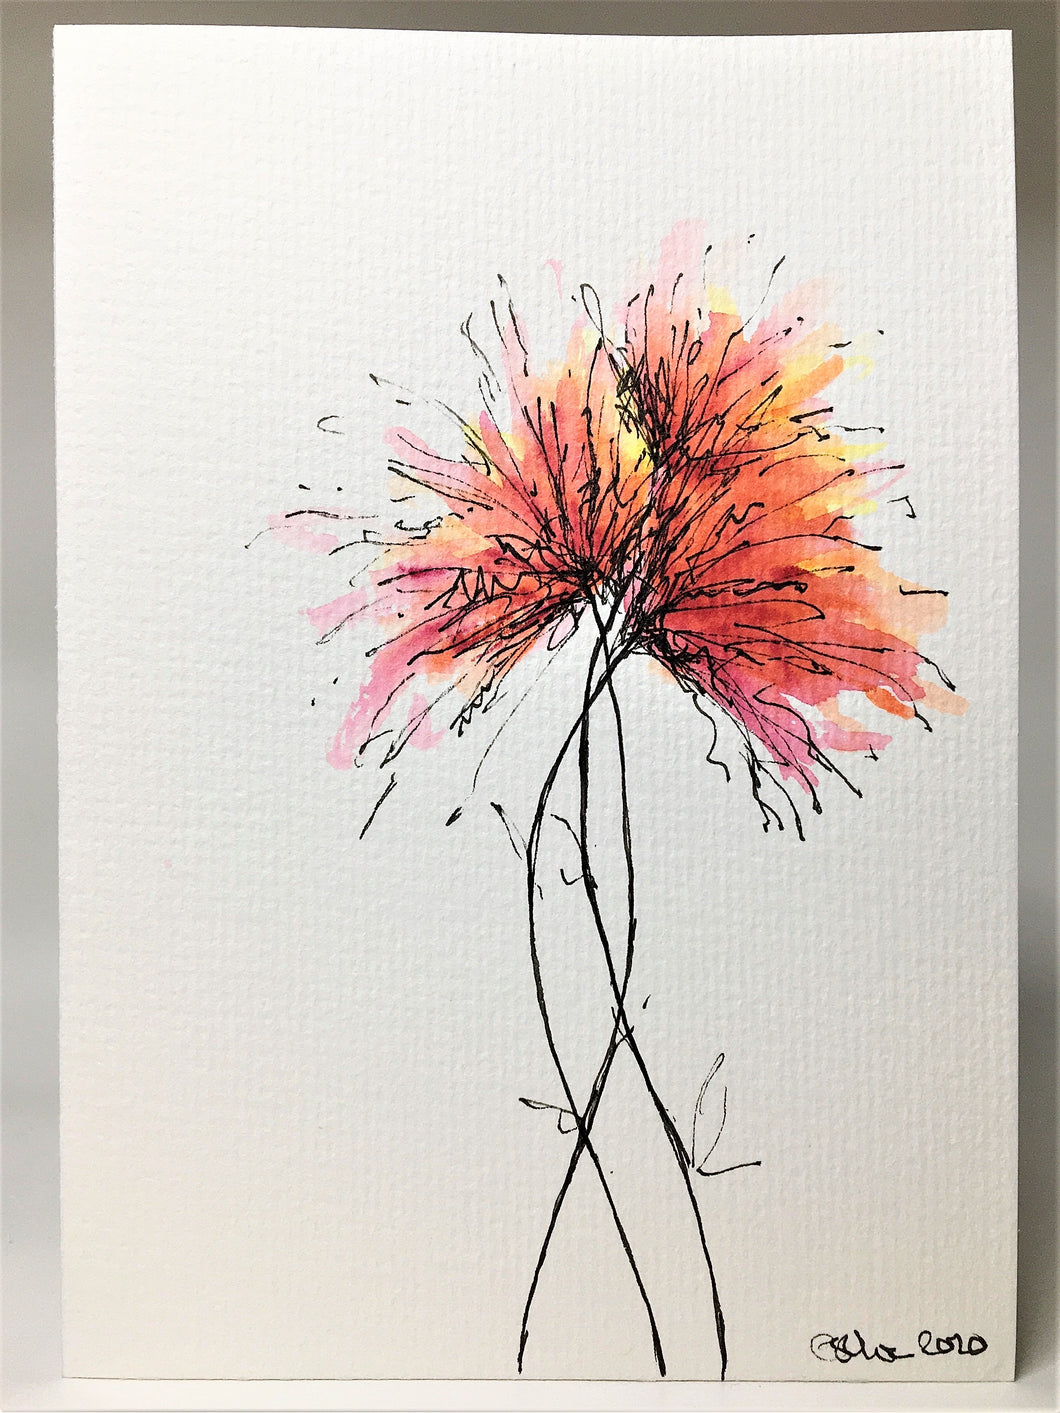 Original Hand Painted Greeting Card - Red, Pink and Yellow Spiky Flowers - eDgE dEsiGn London